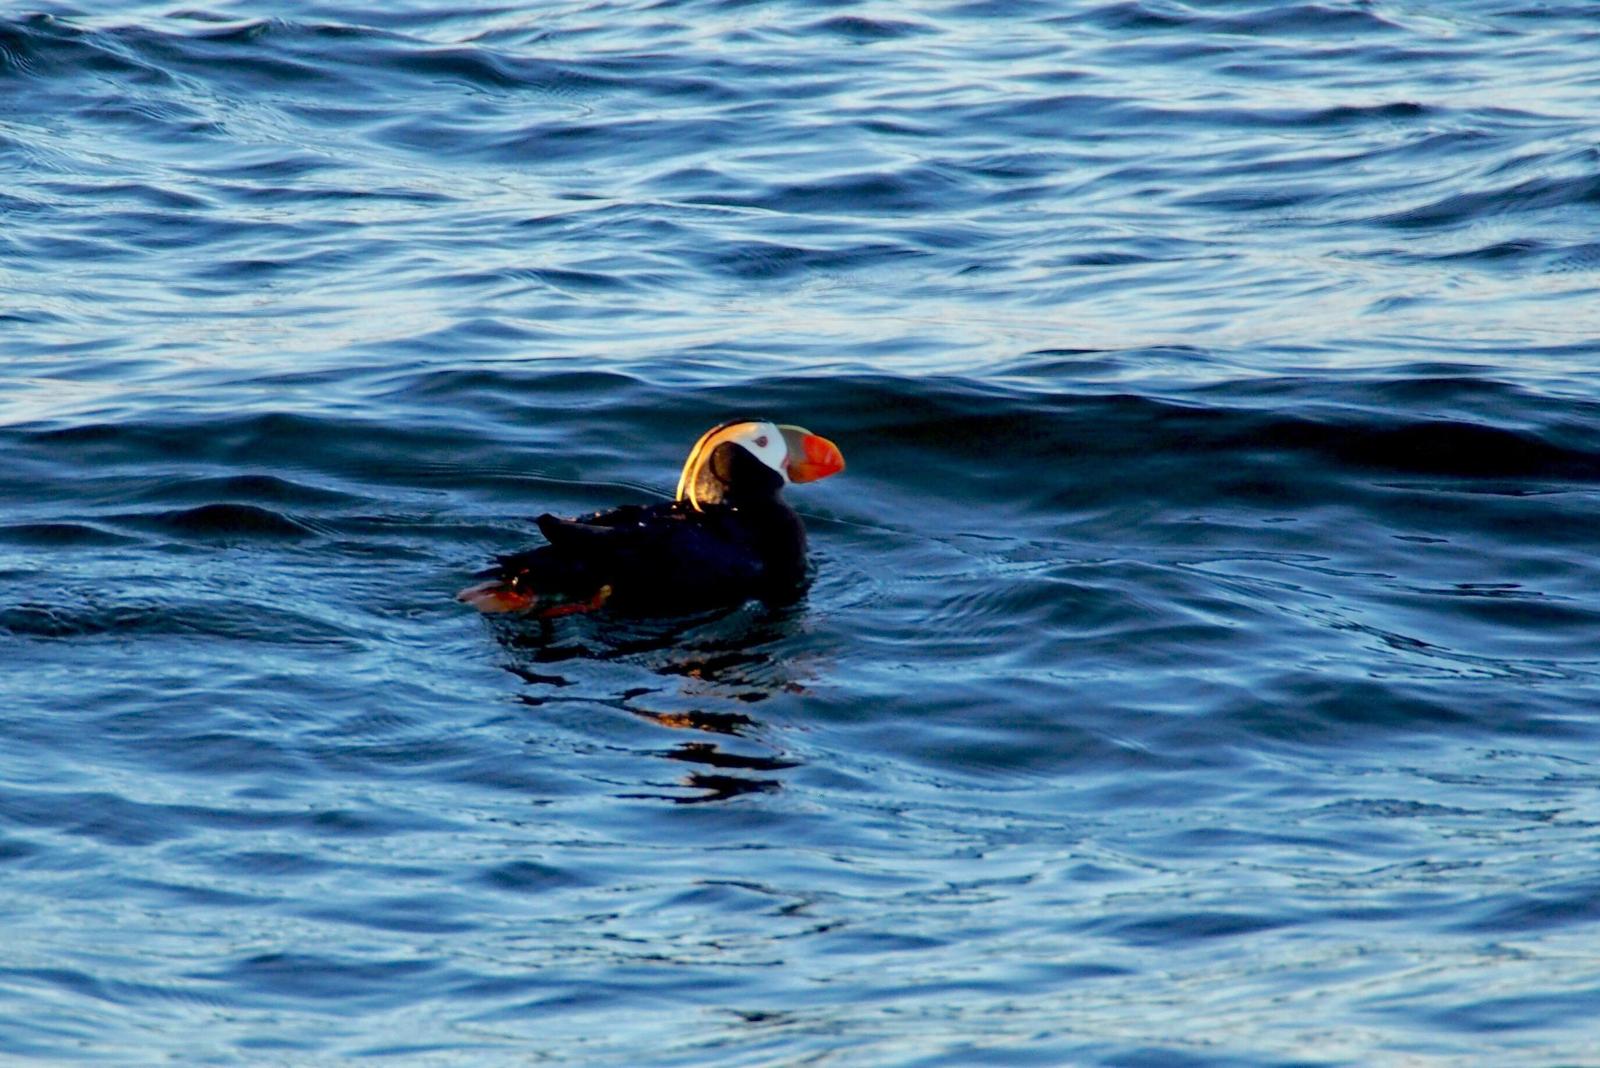 Tufted Puffin Photo by Heidi Belinsky